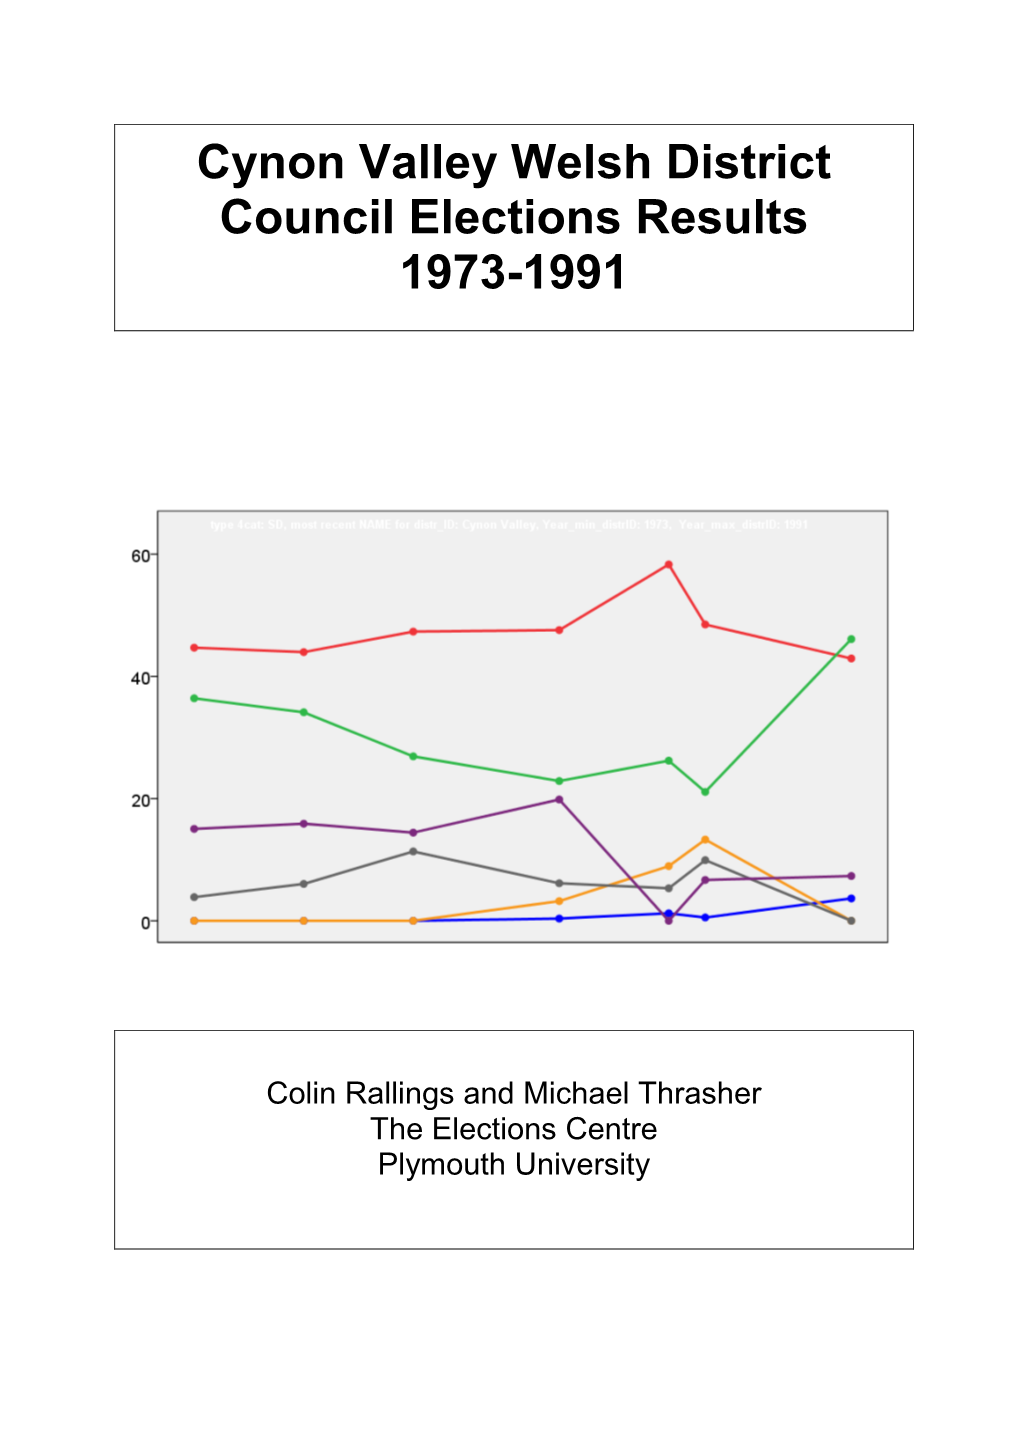 Cynon Valley Welsh District Council Elections Results 1973-1991